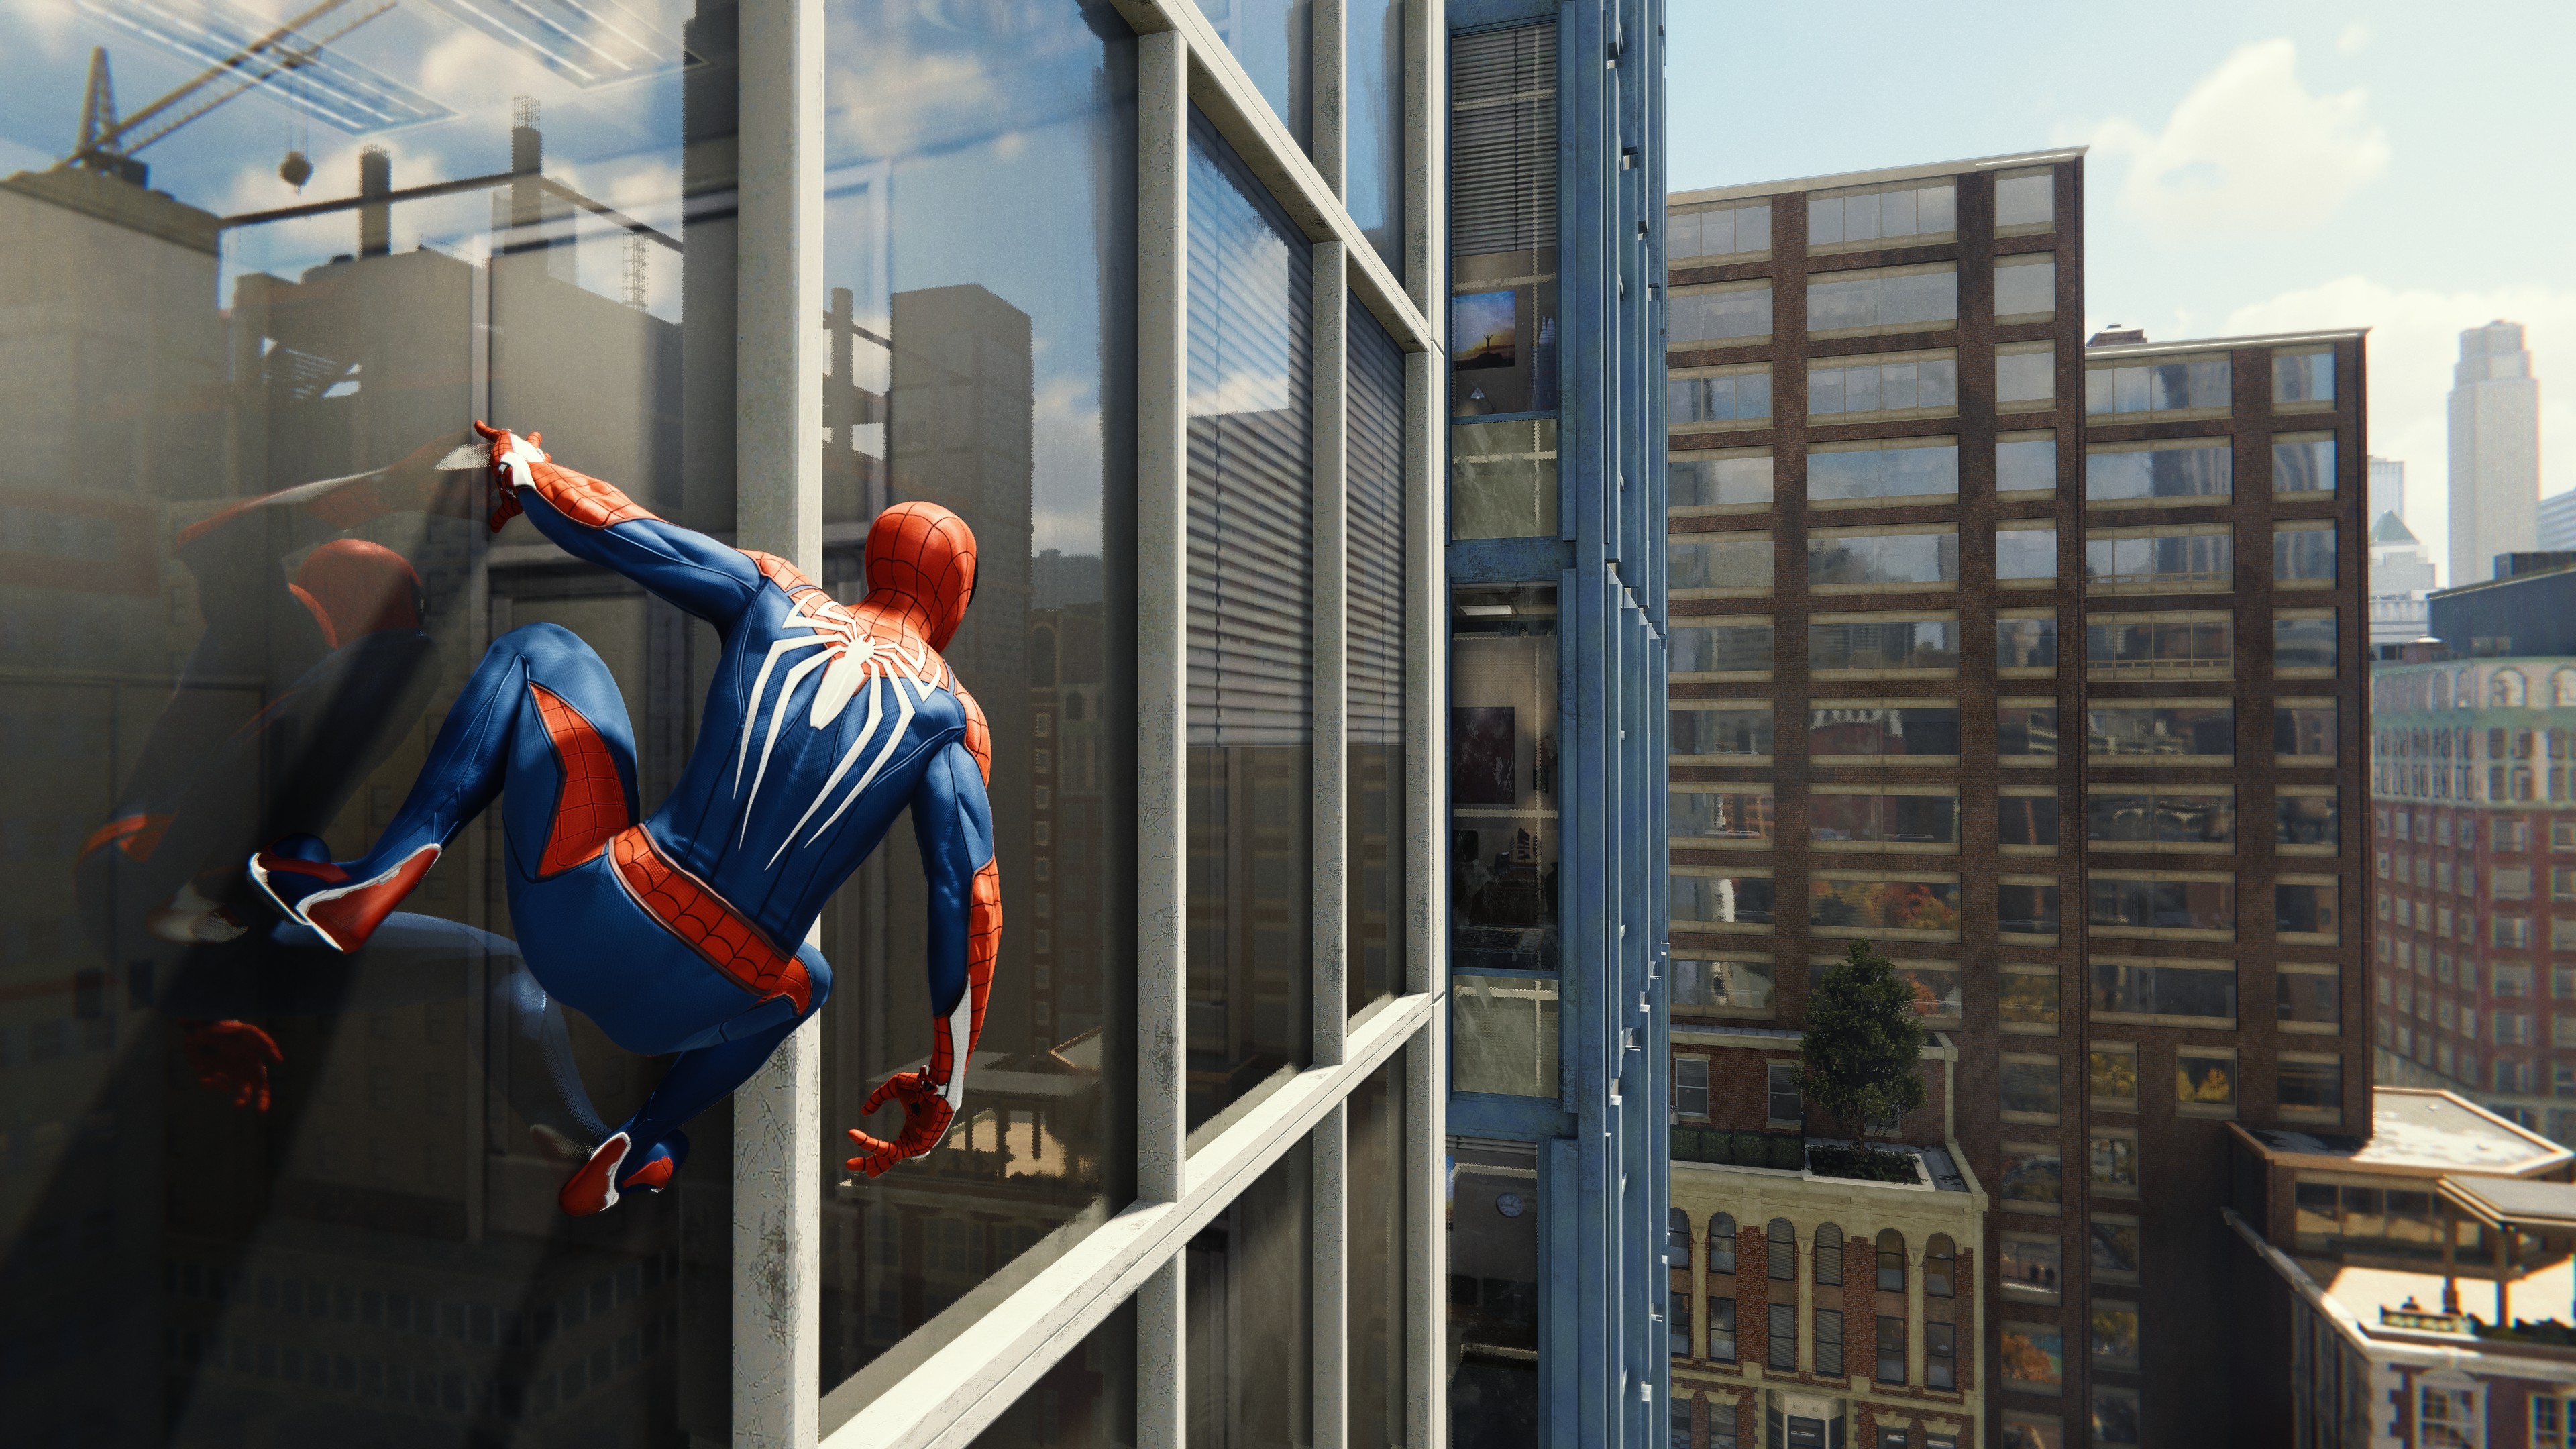 Ultimate Spider-Man System Requirements: Can You Run It?